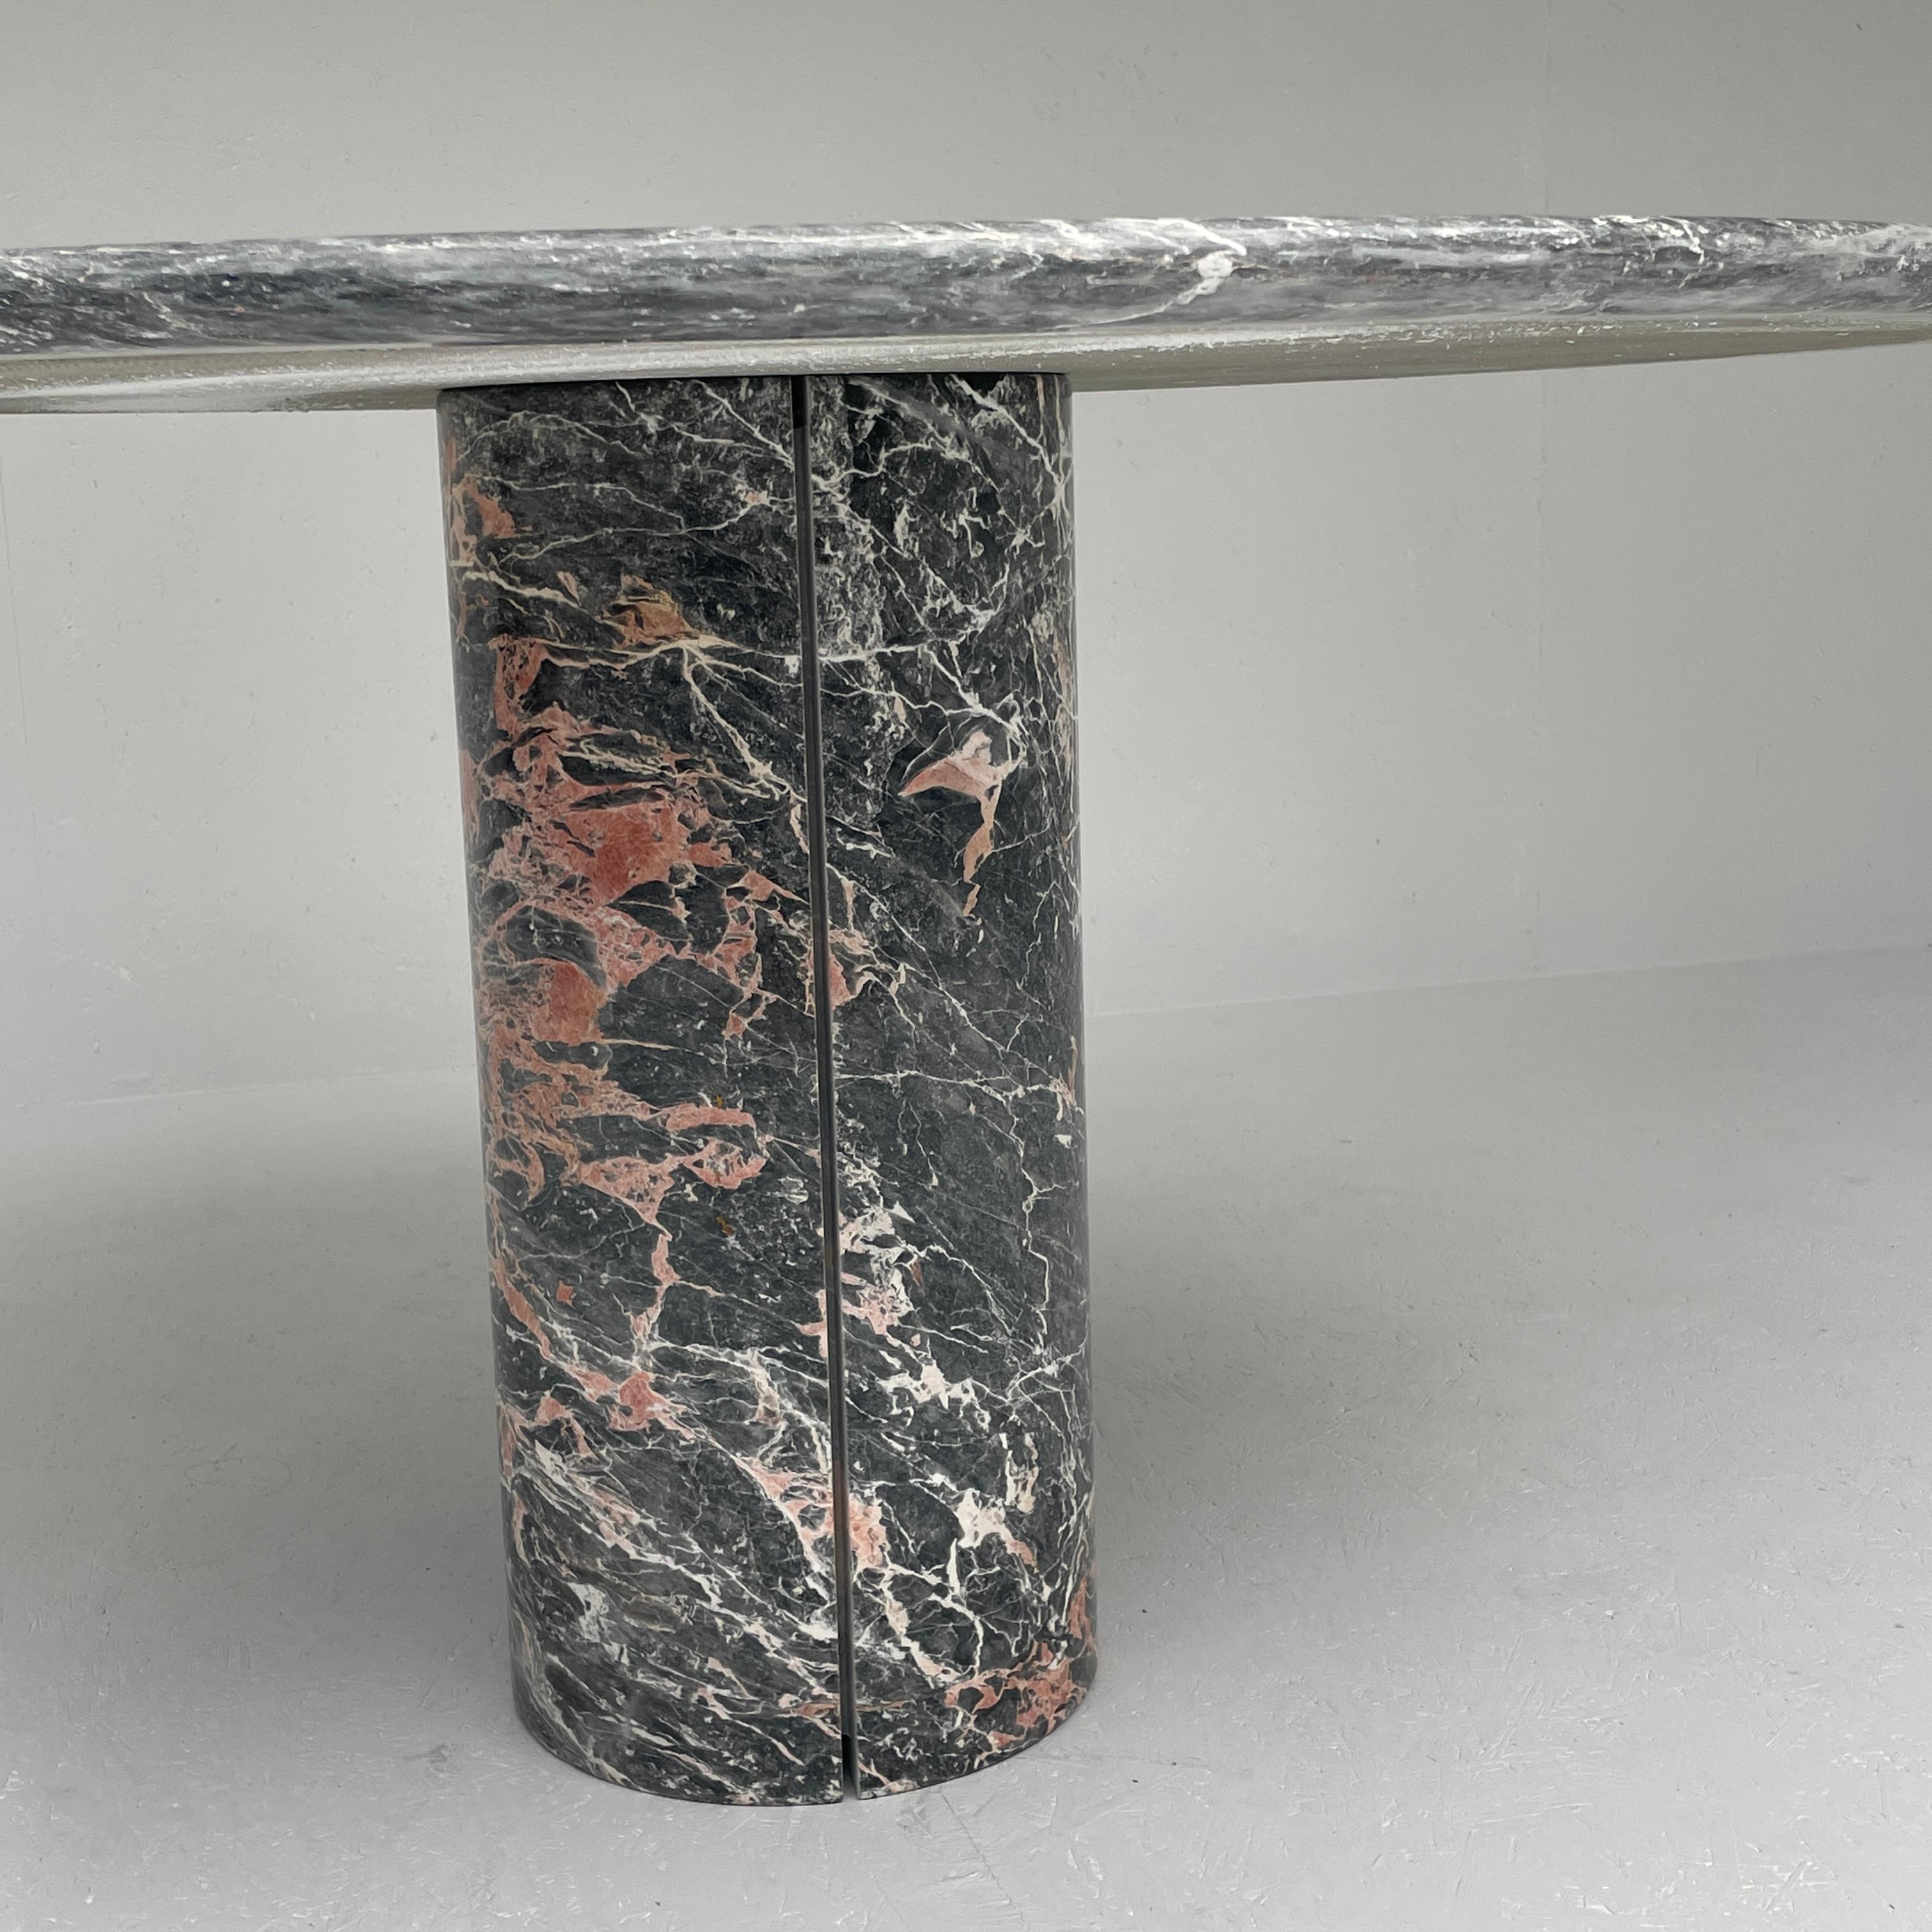 Italian black and red marble dining table. 

Very heavy table. 

Dimensions: H74cm, Diameter 130cm

In mint condition!